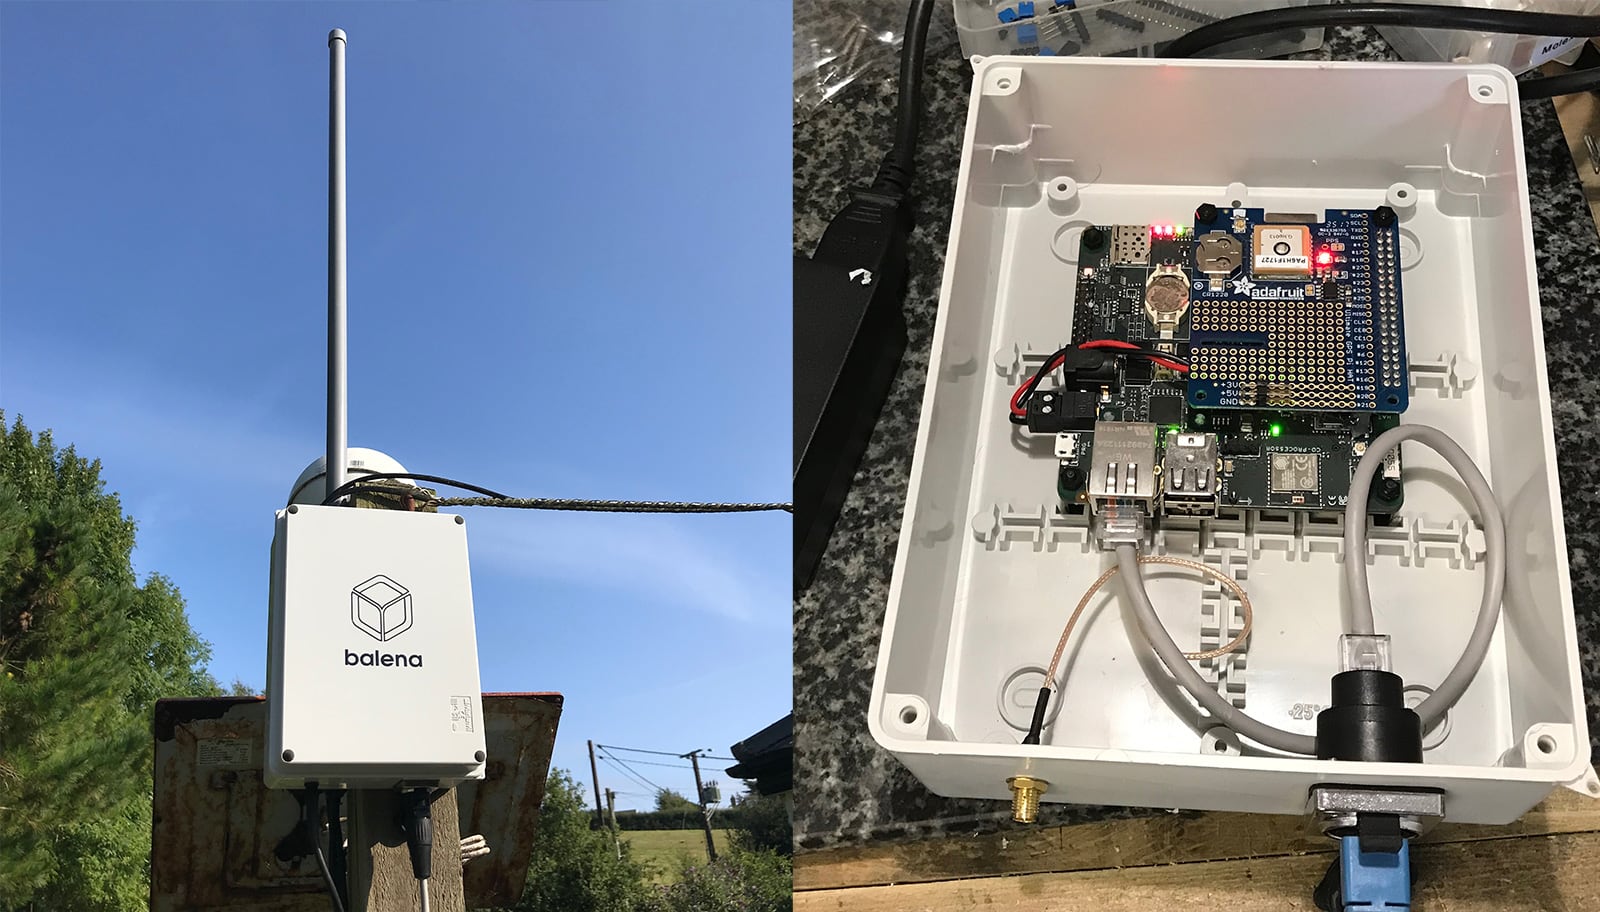 Install a balenaFin outdoors, for use as a LoRa gateway, flight tracker, weather station and more!